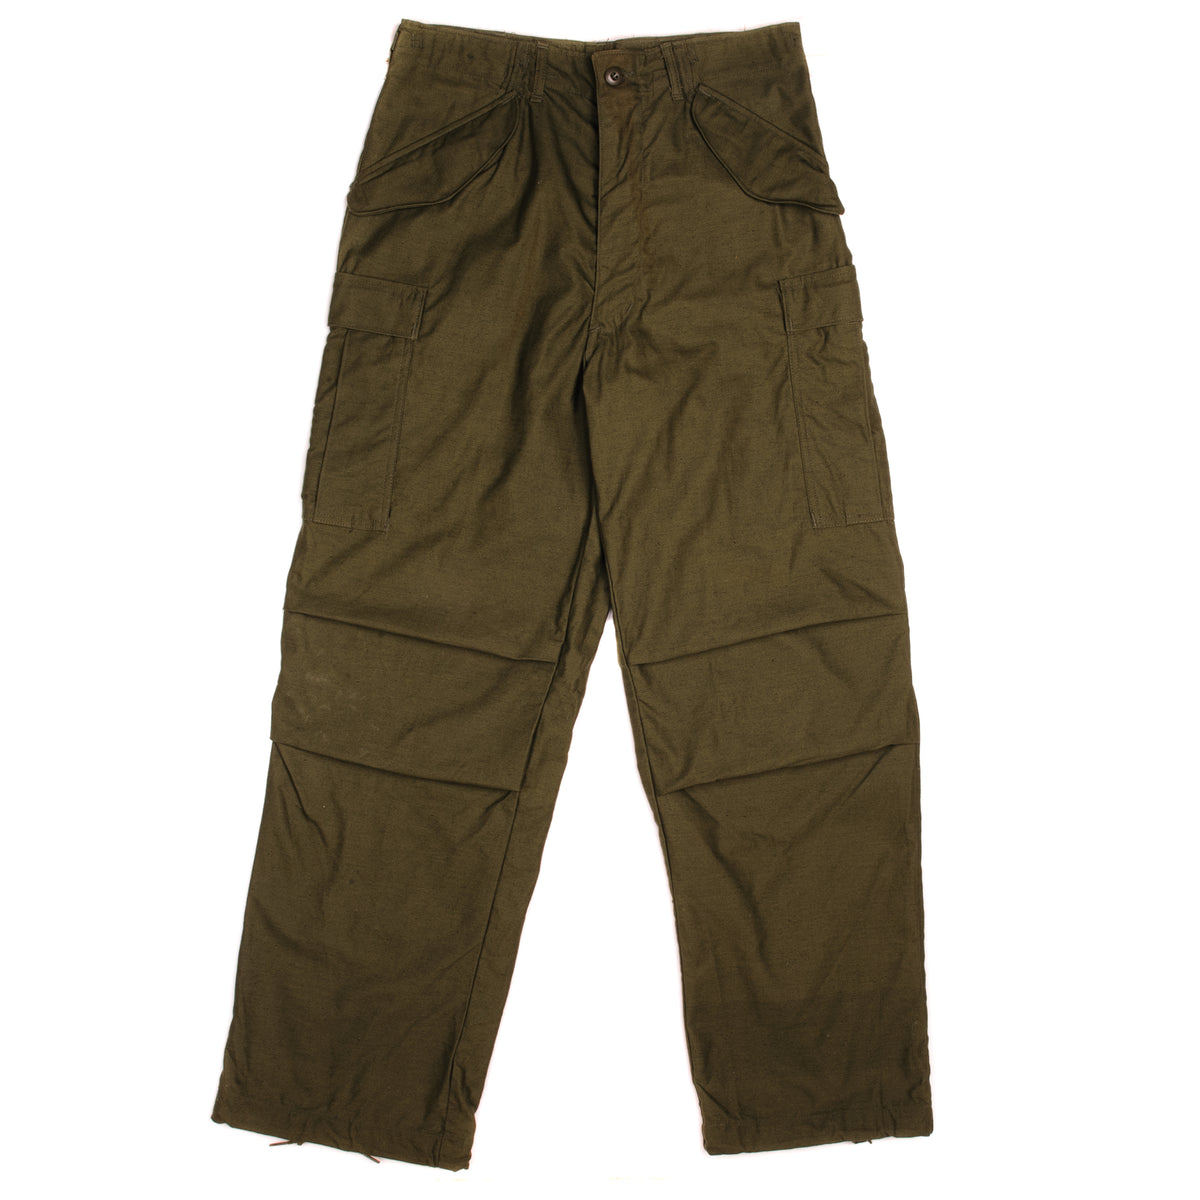 1972 US ARMY M-65 field trousers